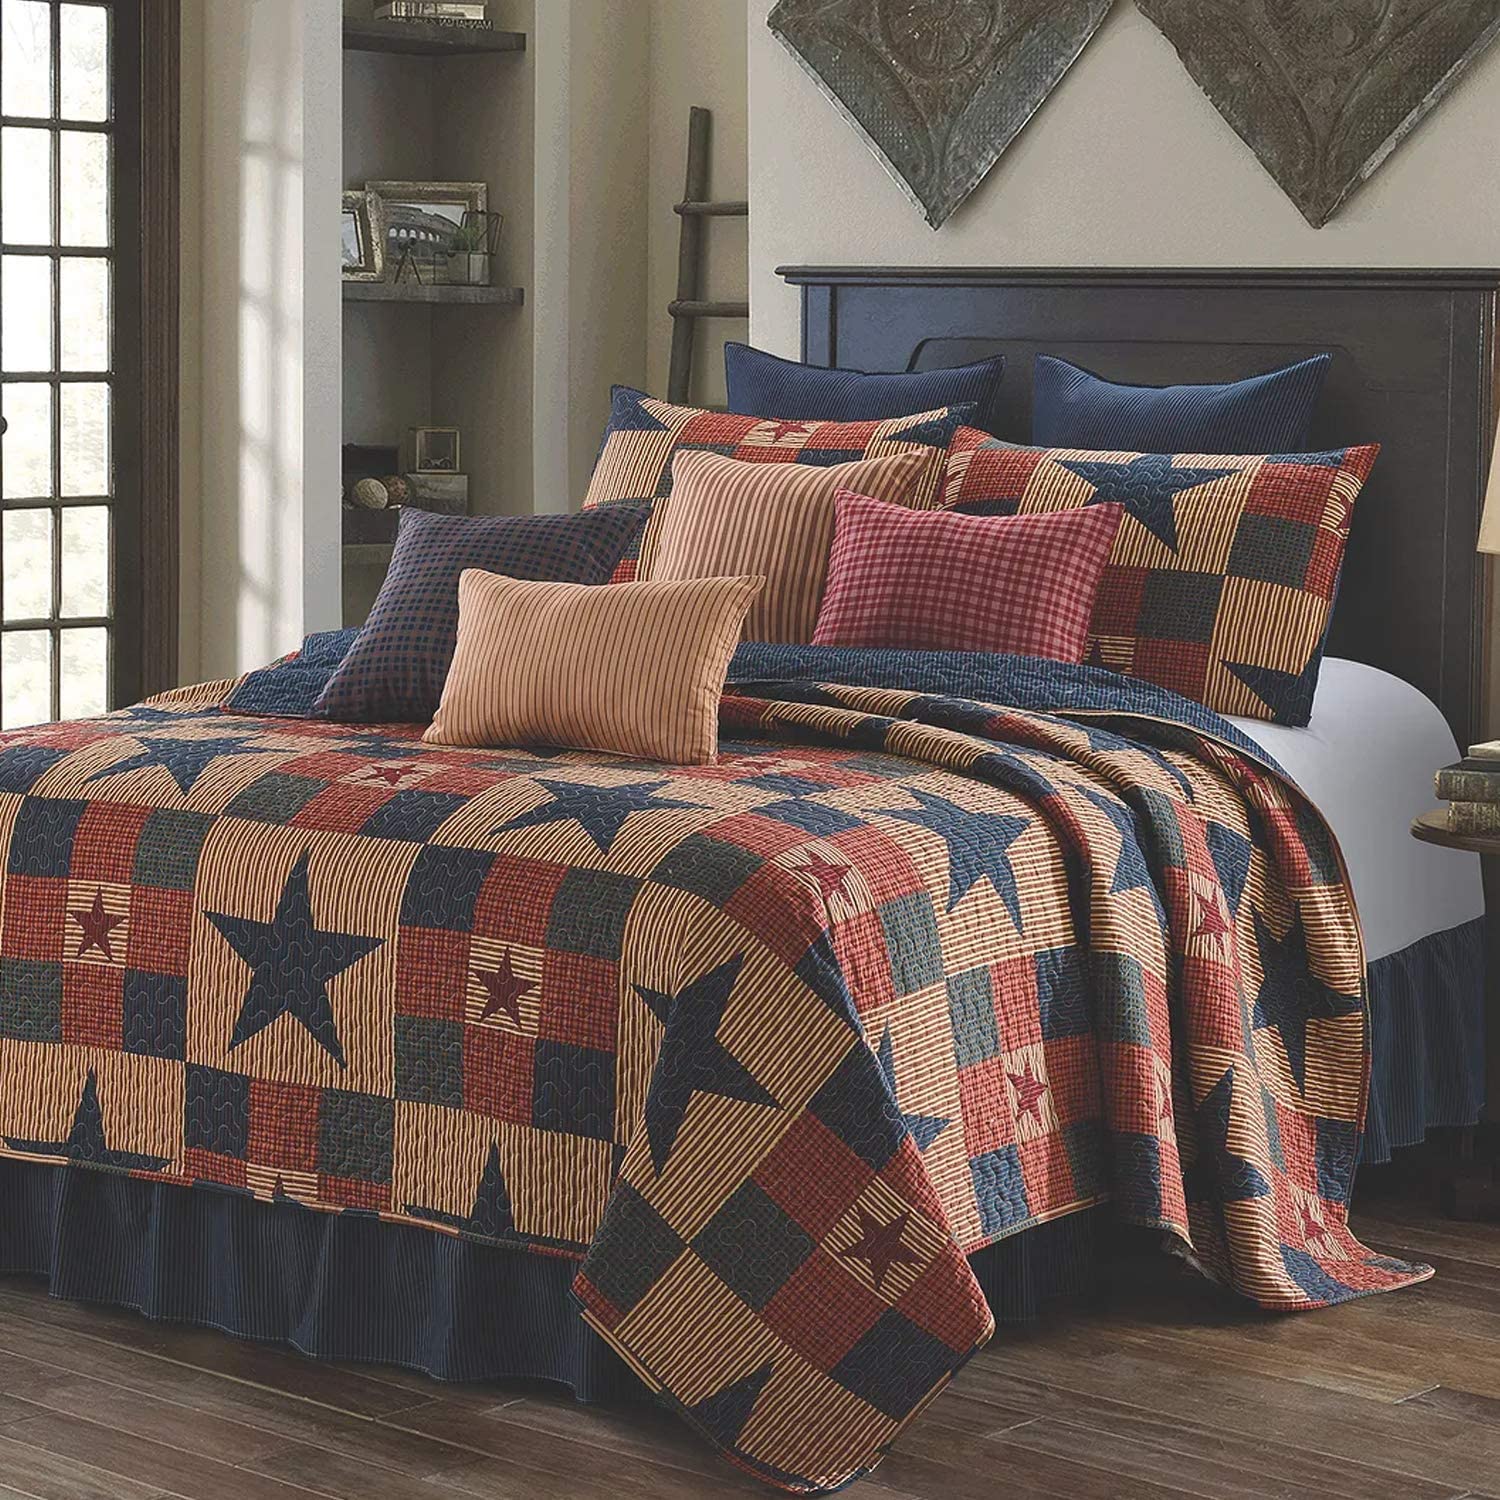 PRIMITIVE COUNTRY CABIN LODGE CAROLINA BLUE STAR Full Queen QUILT SET 